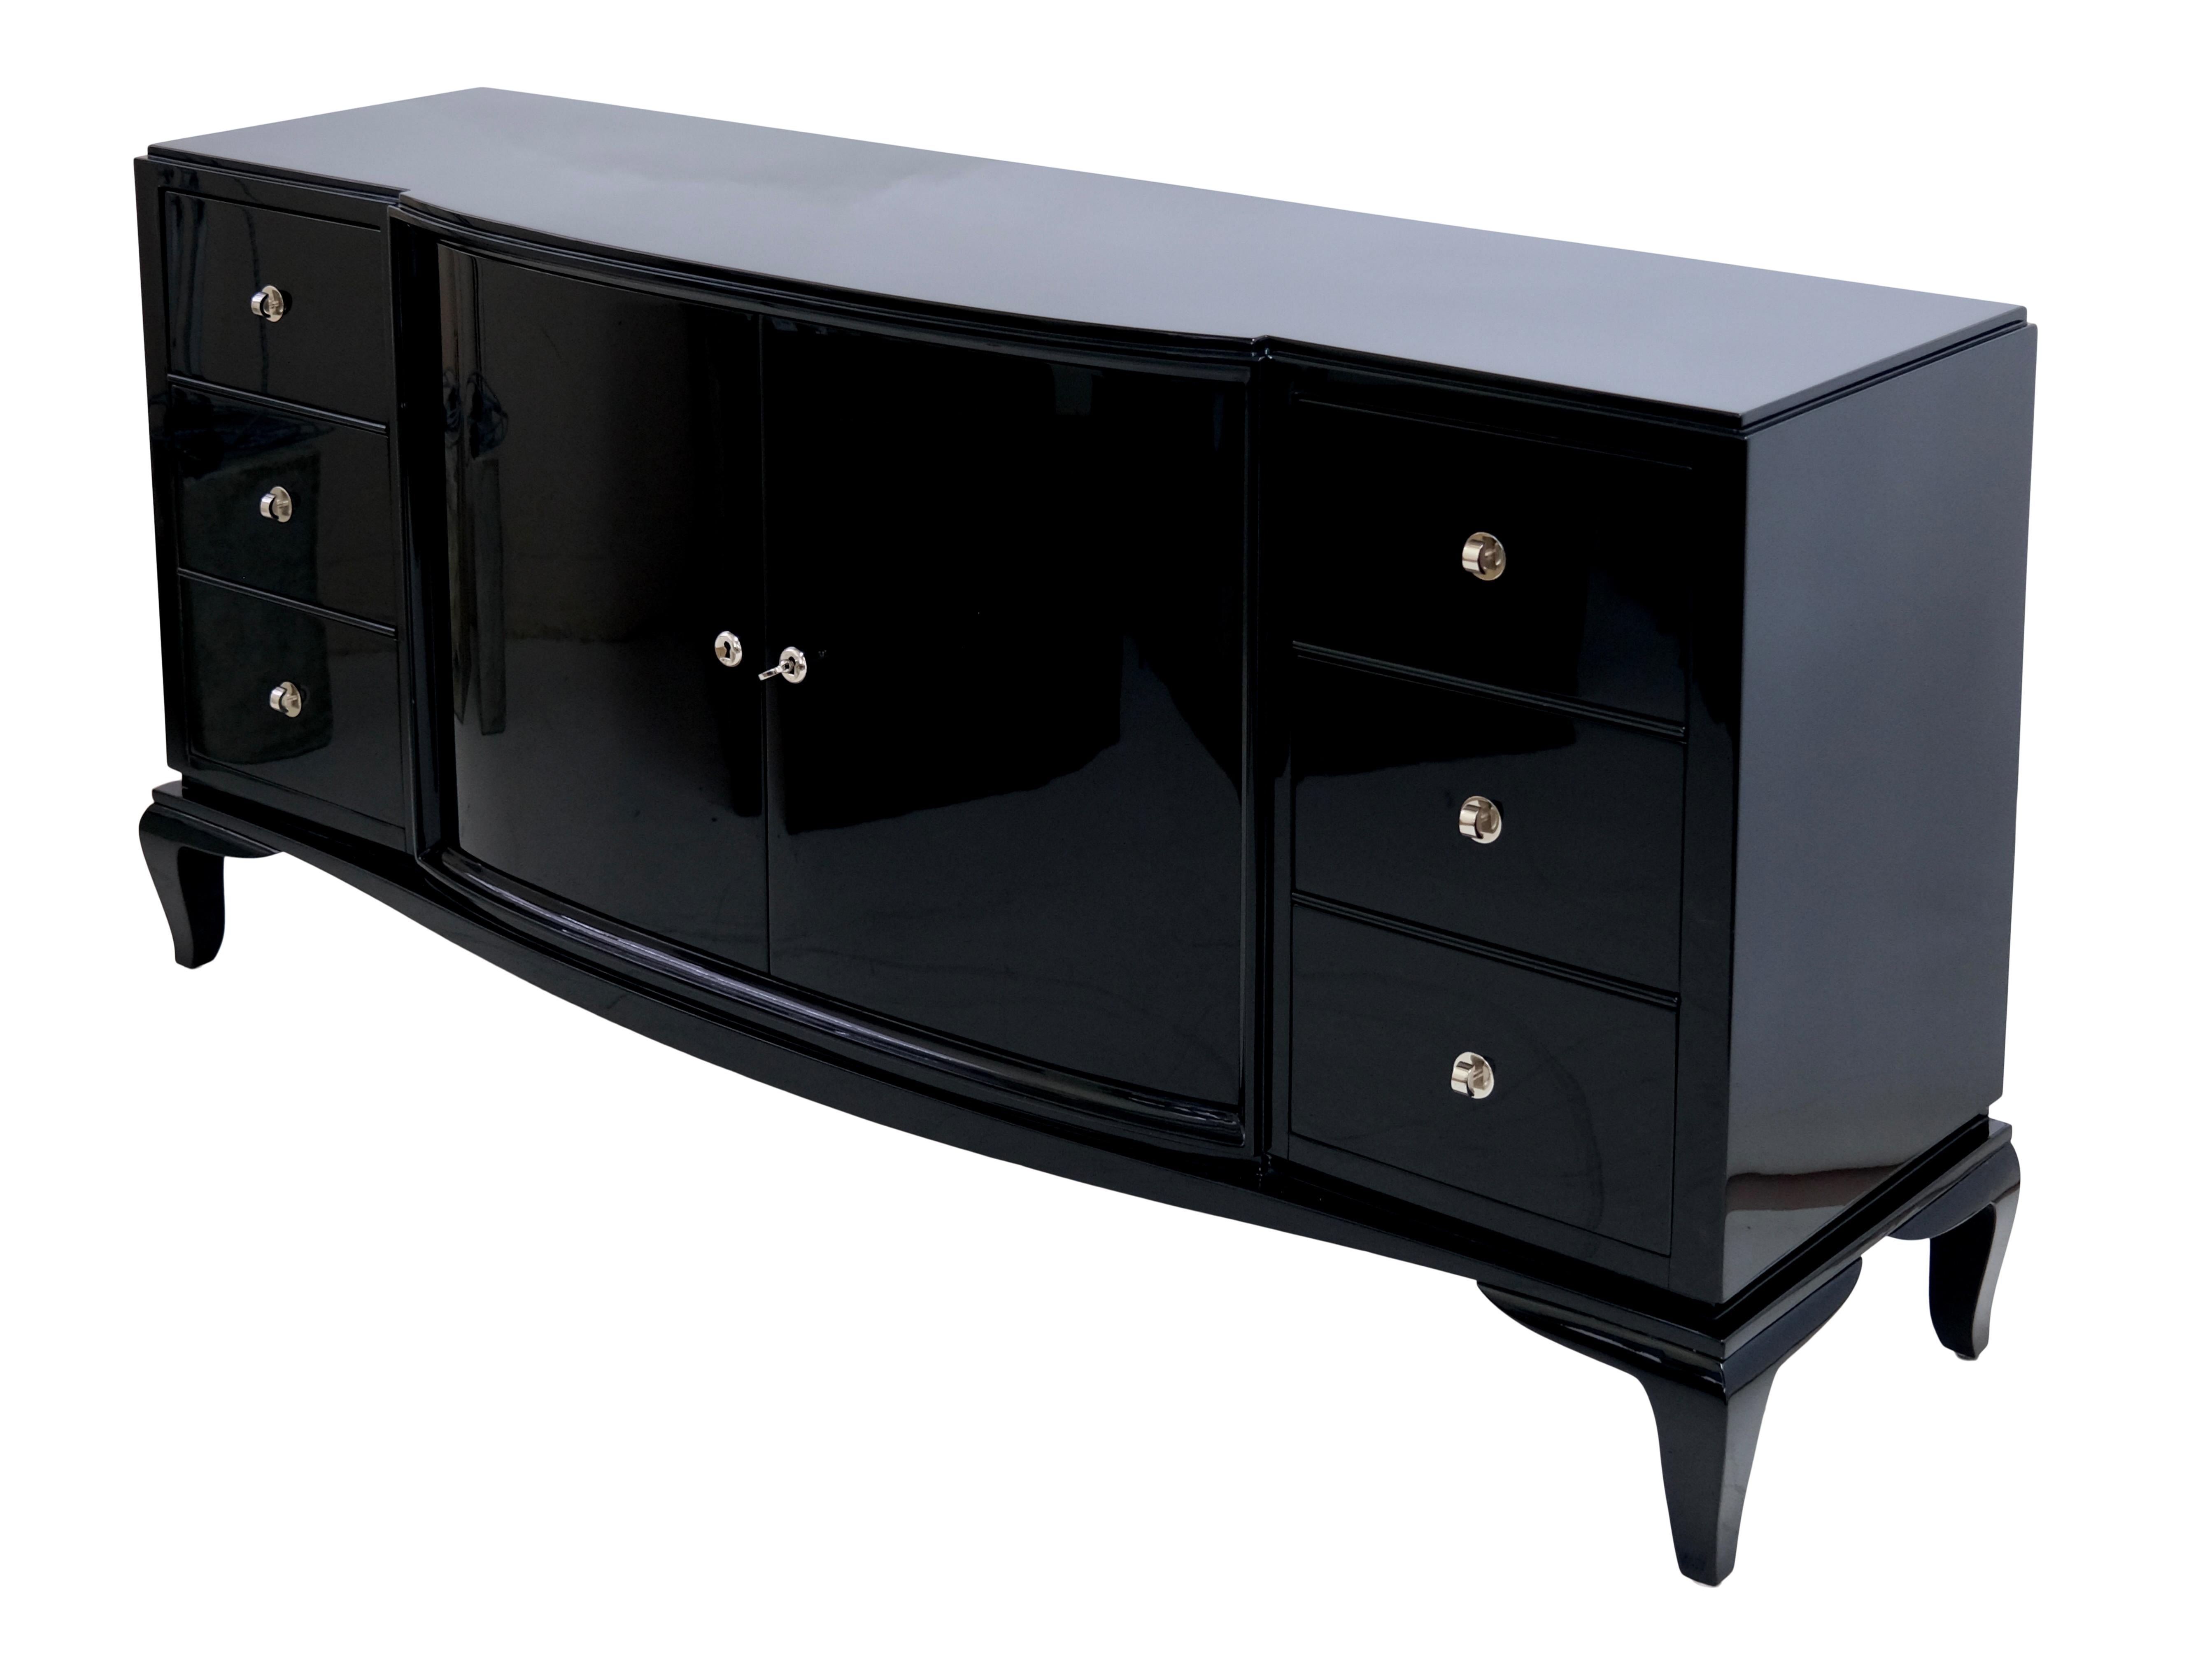 1940s French Art Deco Sideboard in Black Piano Lacquer with Drawers and Doors In Good Condition For Sale In Ulm, DE